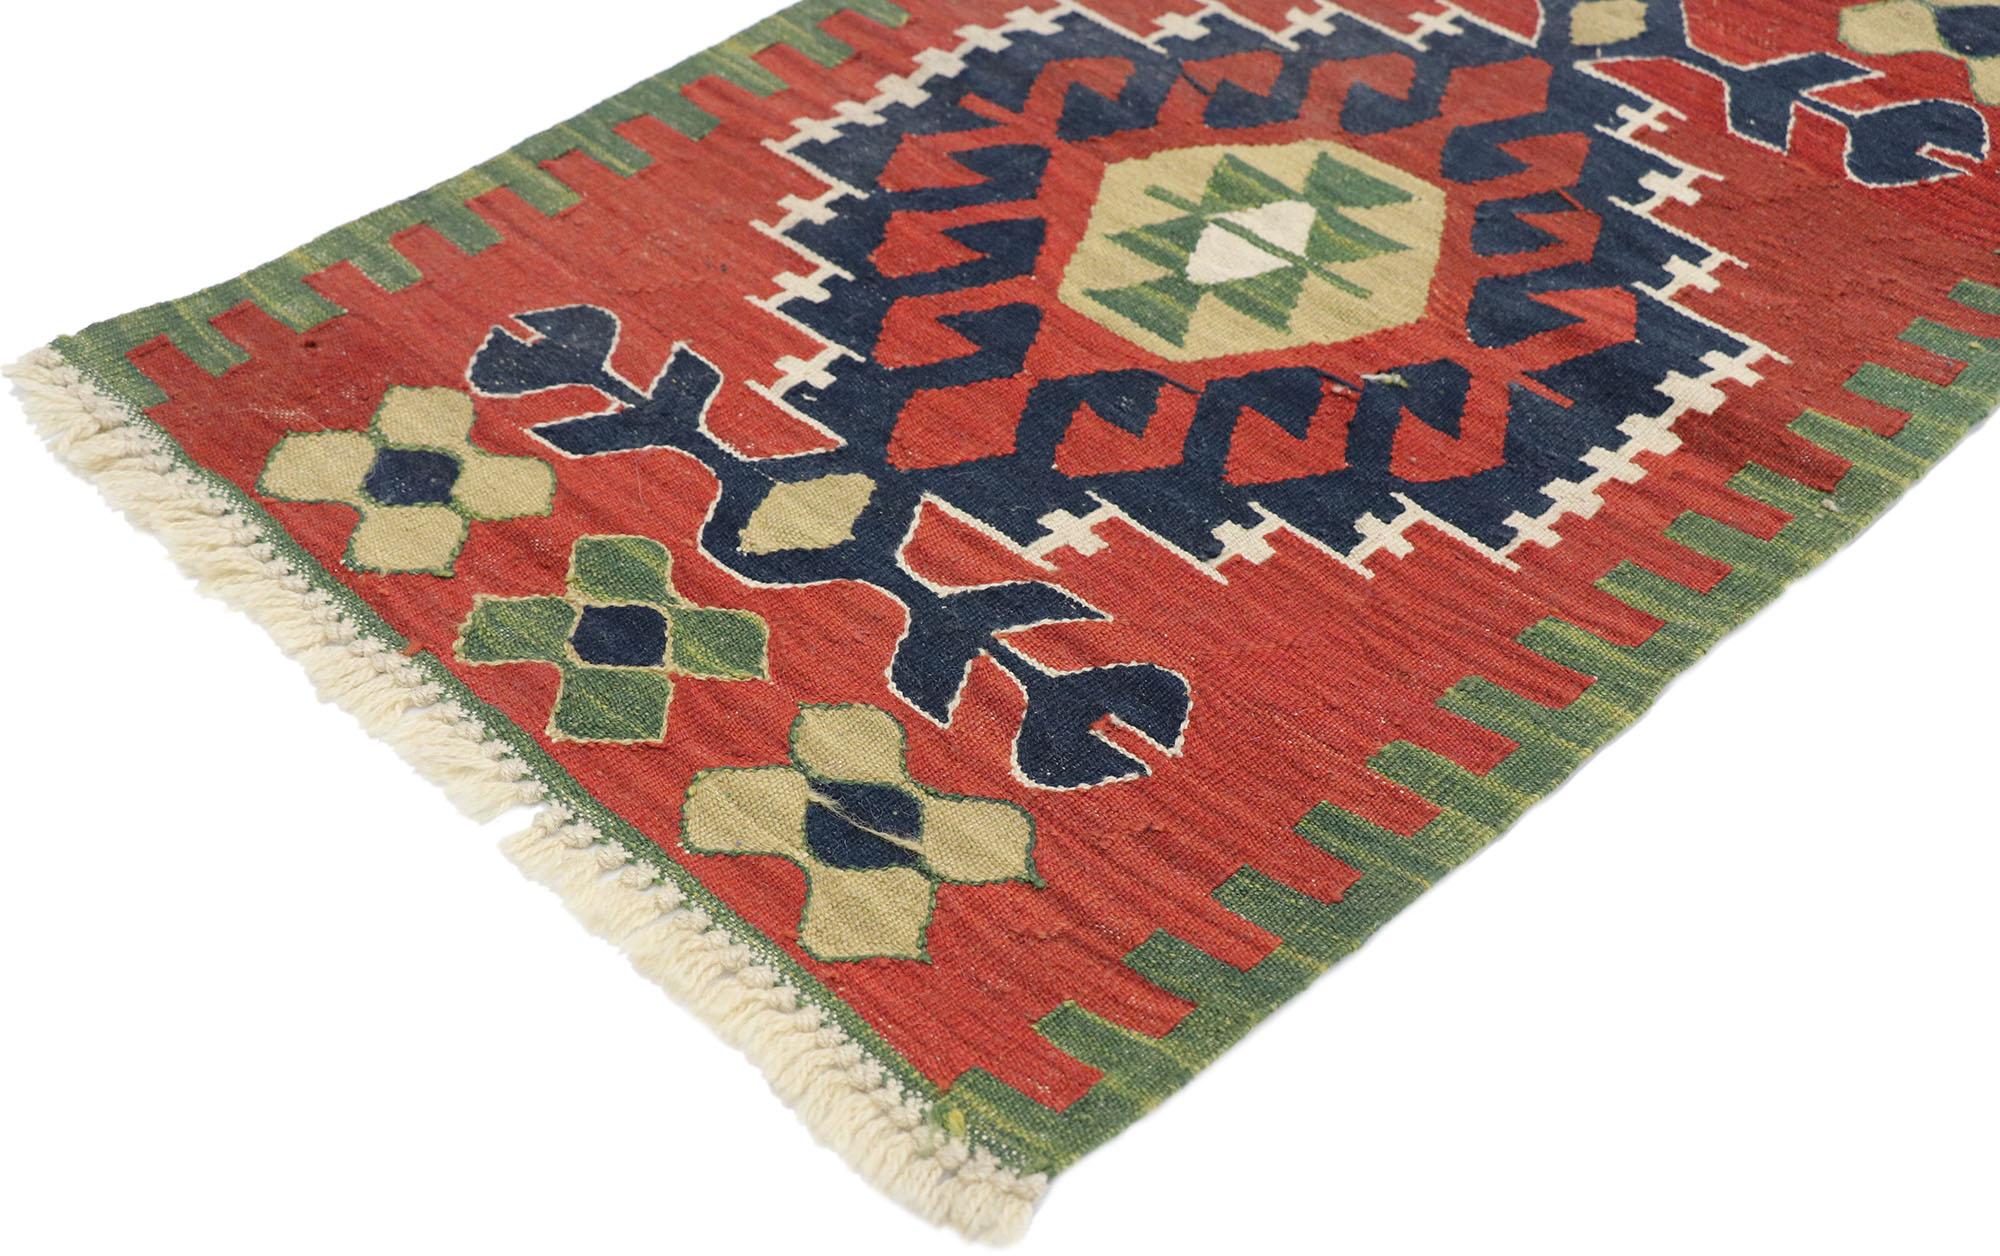 77874, Vintage Persian Shiraz Kilim rug with Tribal Style 01'11 x 02'10. Full of tiny details and a bold expressive design combined with vibrant colors and tribal style, this hand-woven wool vintage Persian Shiraz kilim rug is a captivating vision